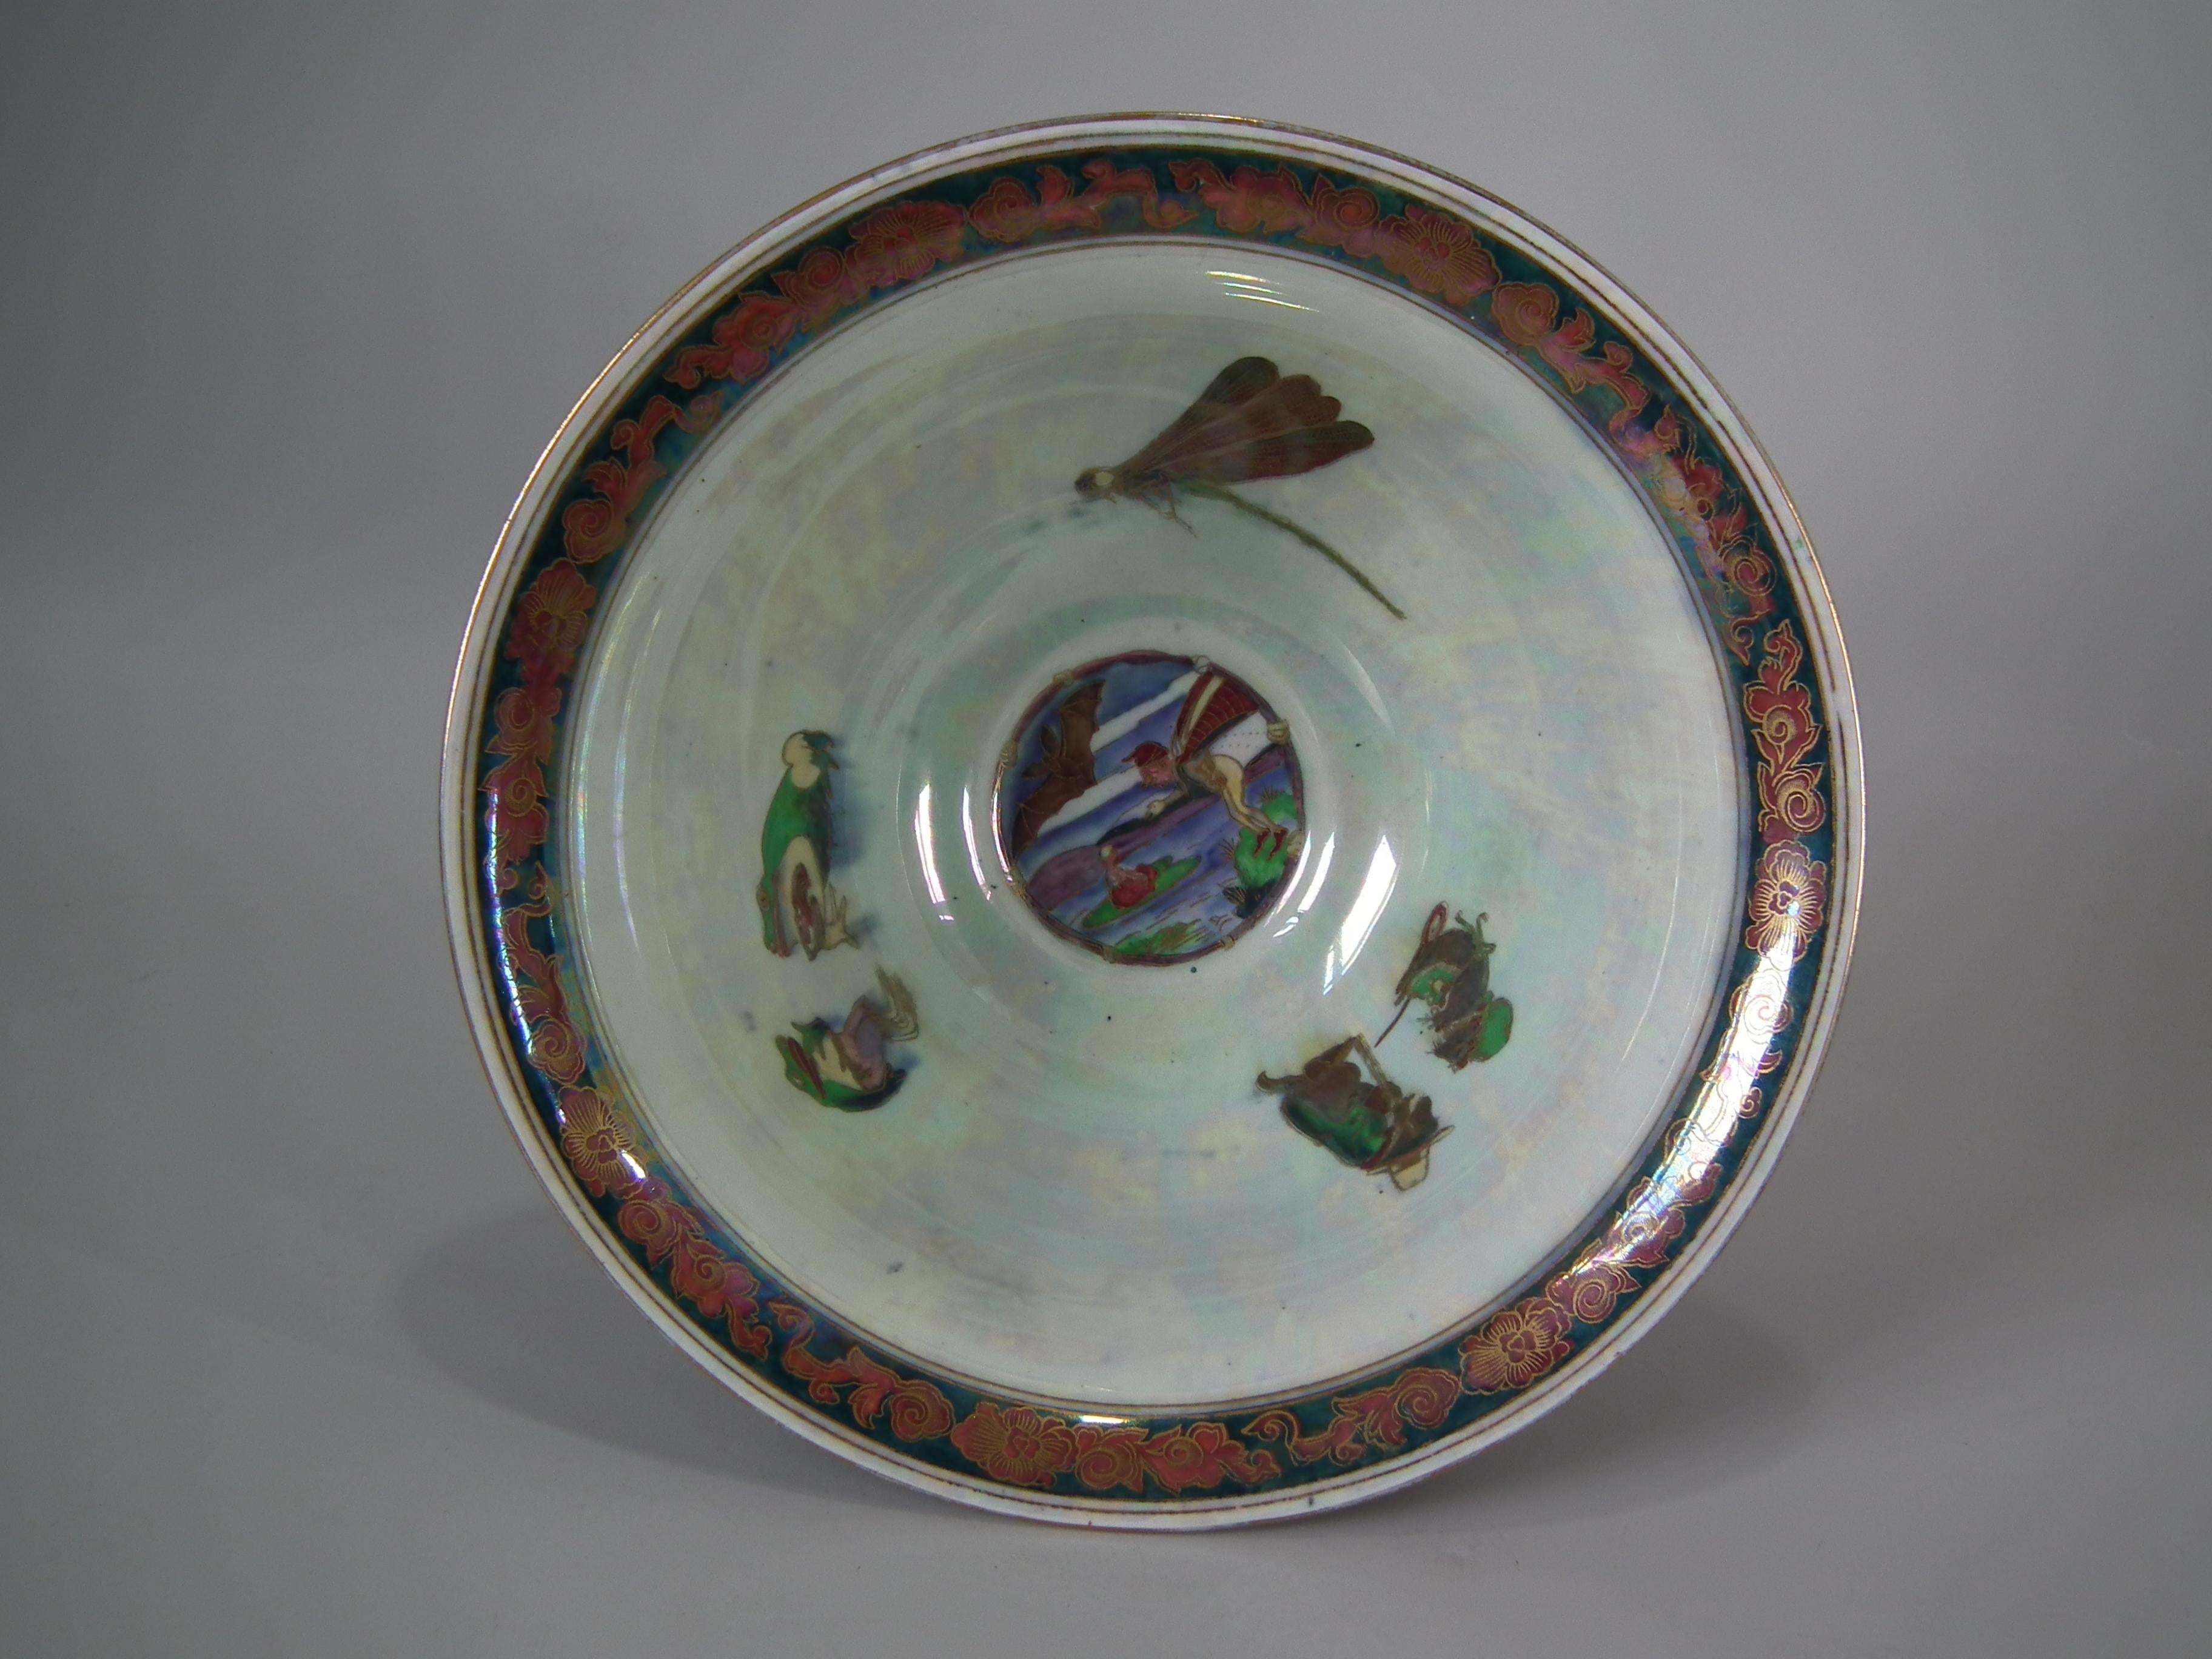 Wedgwood fairyland lustre antique centre bowl, decorated with Firbolgs pattern to exterior, and Thumbelina pattern to interior. Dragon Bead border to rim and foot rim. Maker's marks including printed Portland Vase mark and 'WEGDWOOD ENGLAND', and